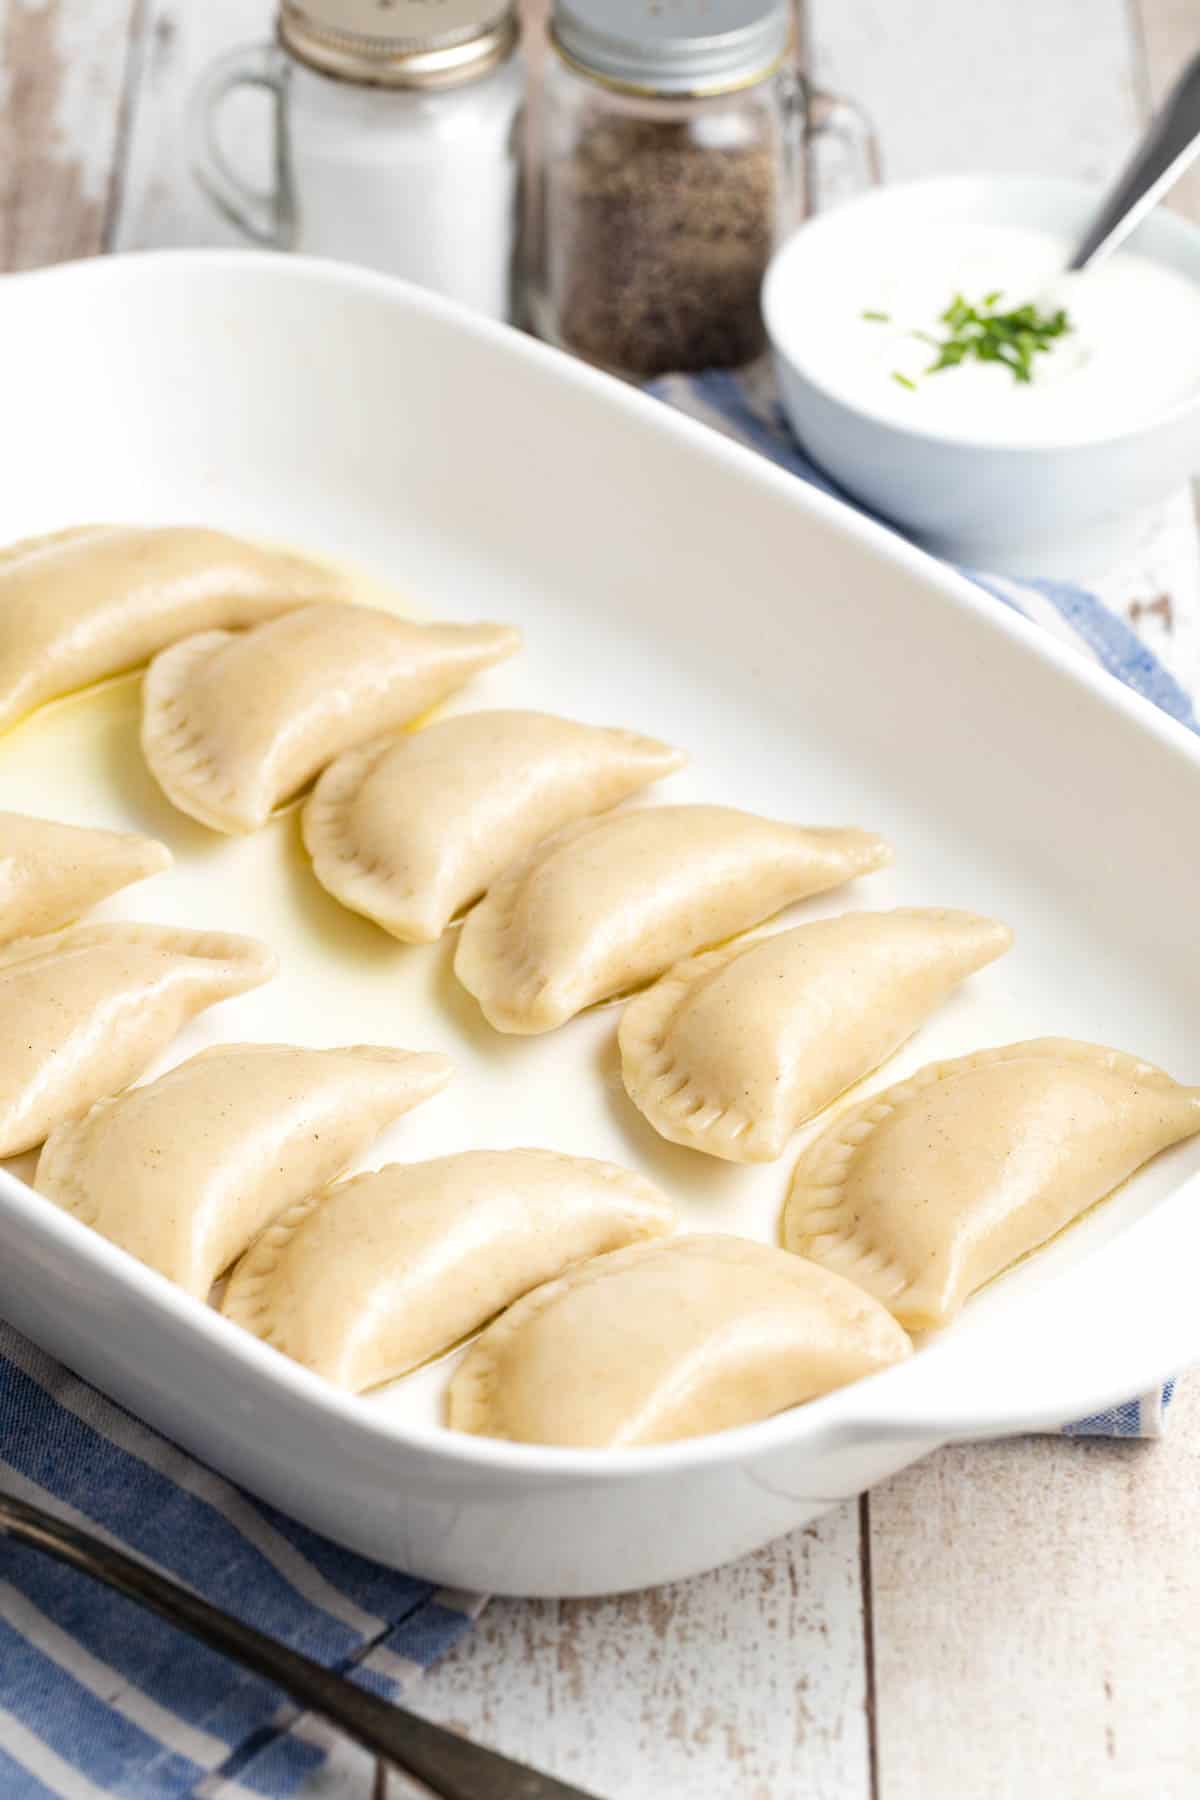 A white baking dish filled with uncooked pierogi.